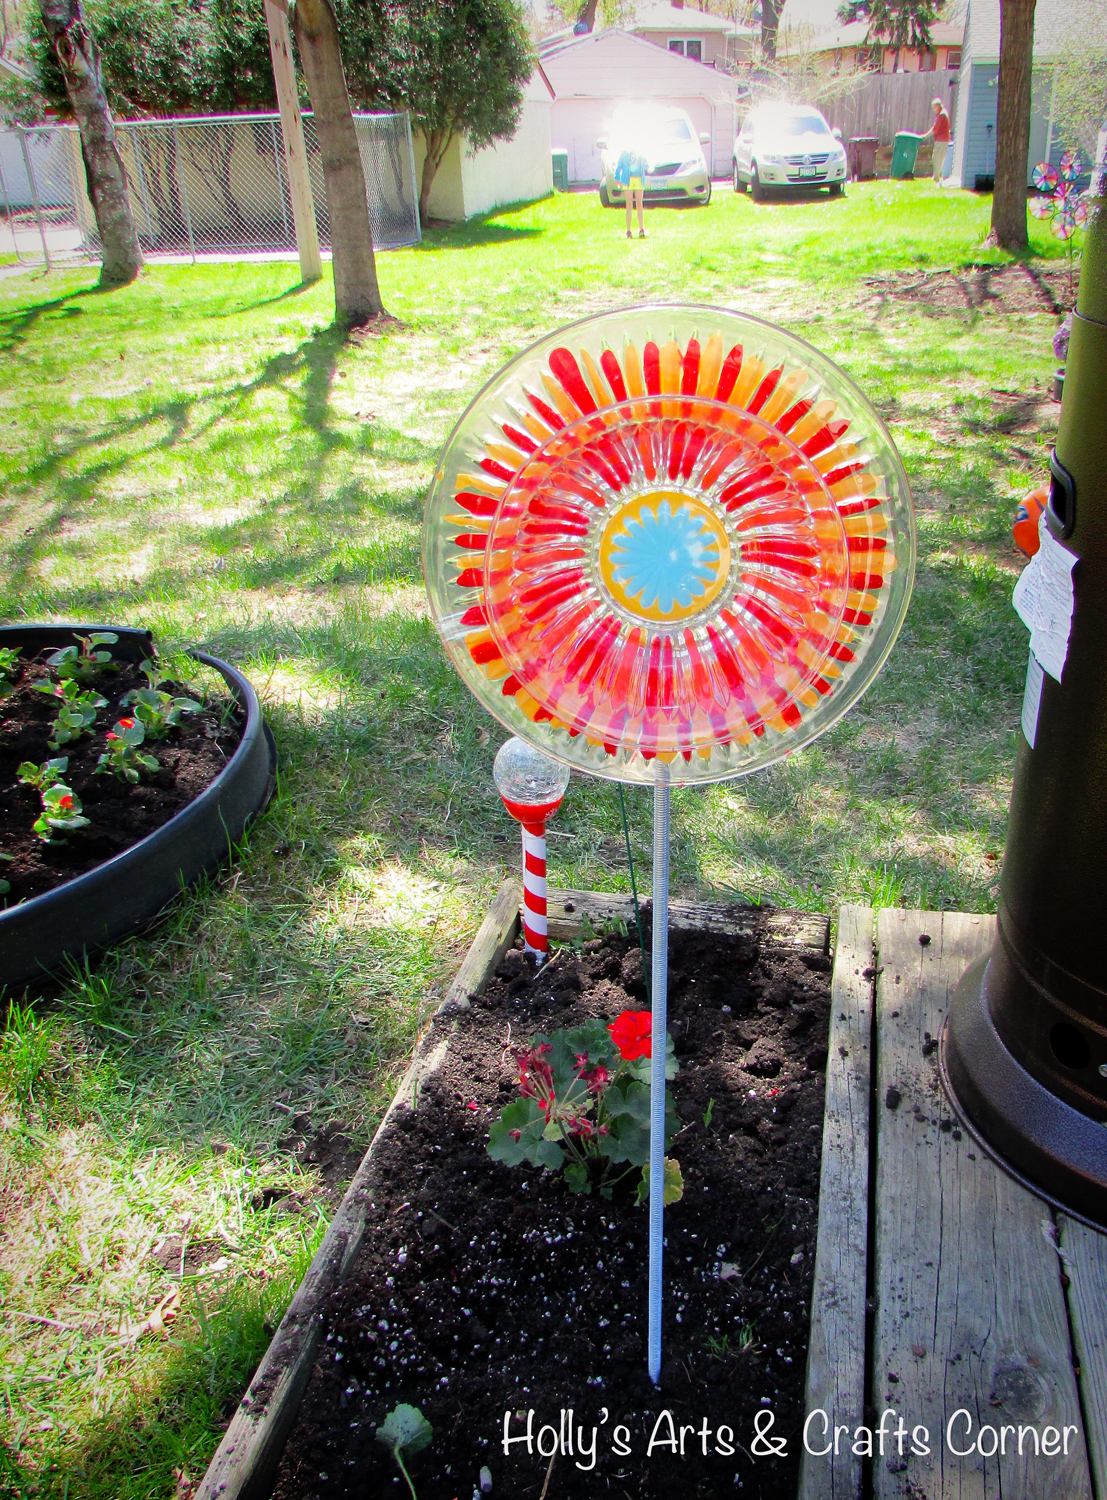 Holly's Arts and Crafts Corner: Craft Project: Handpainted Garden Art